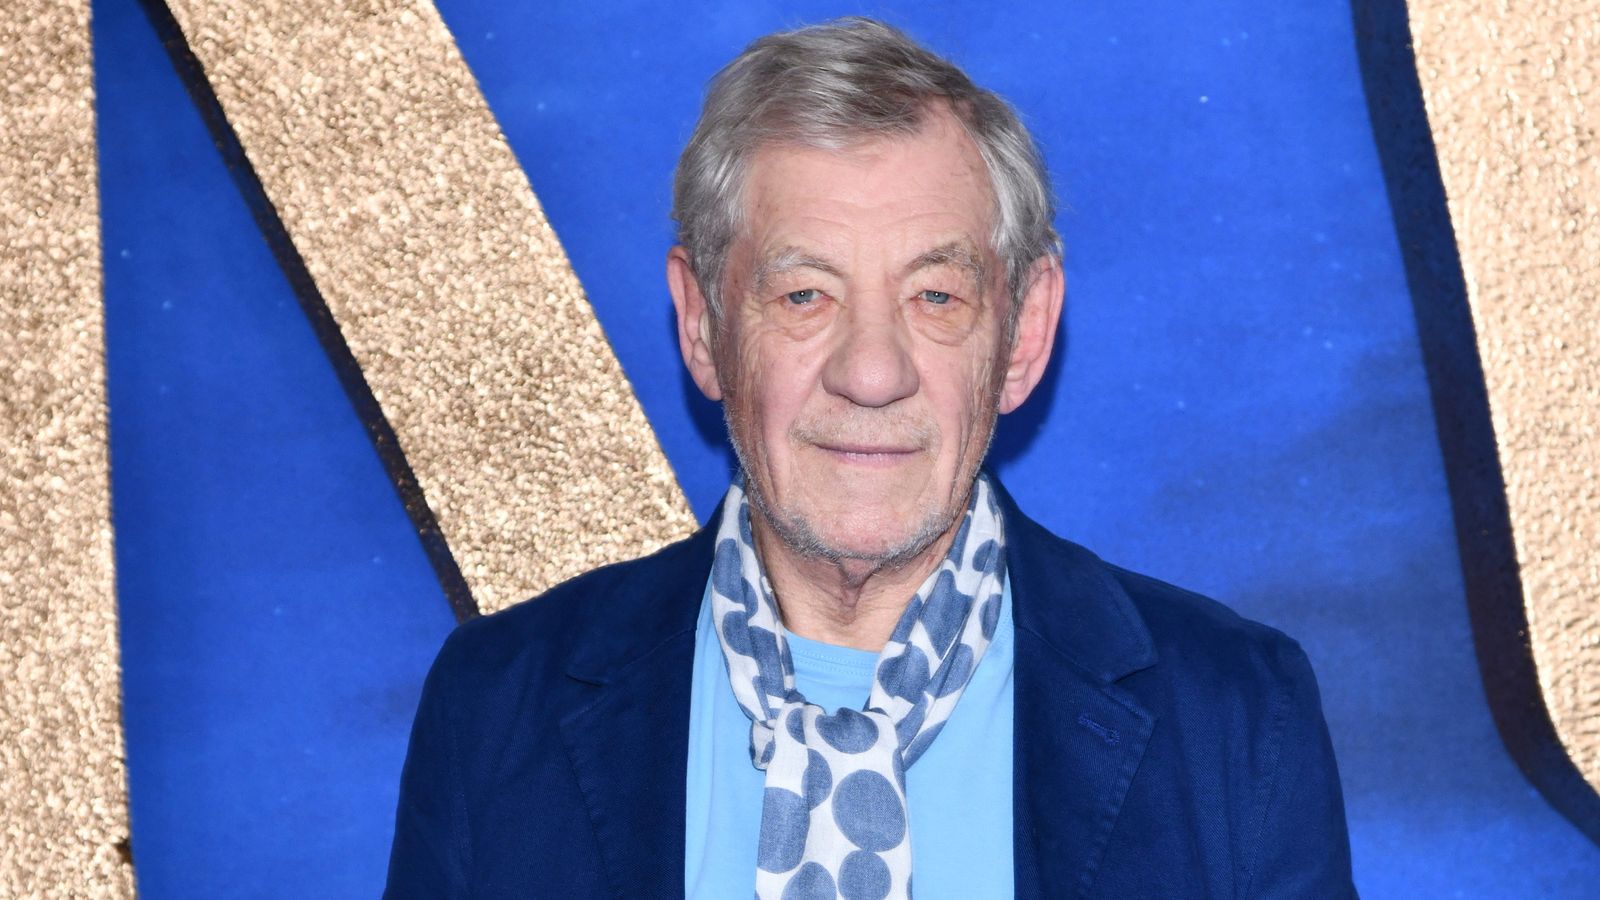 Sir Ian McKellen 'recovering well' and set for West End return when 'ready' after on-stage fall 